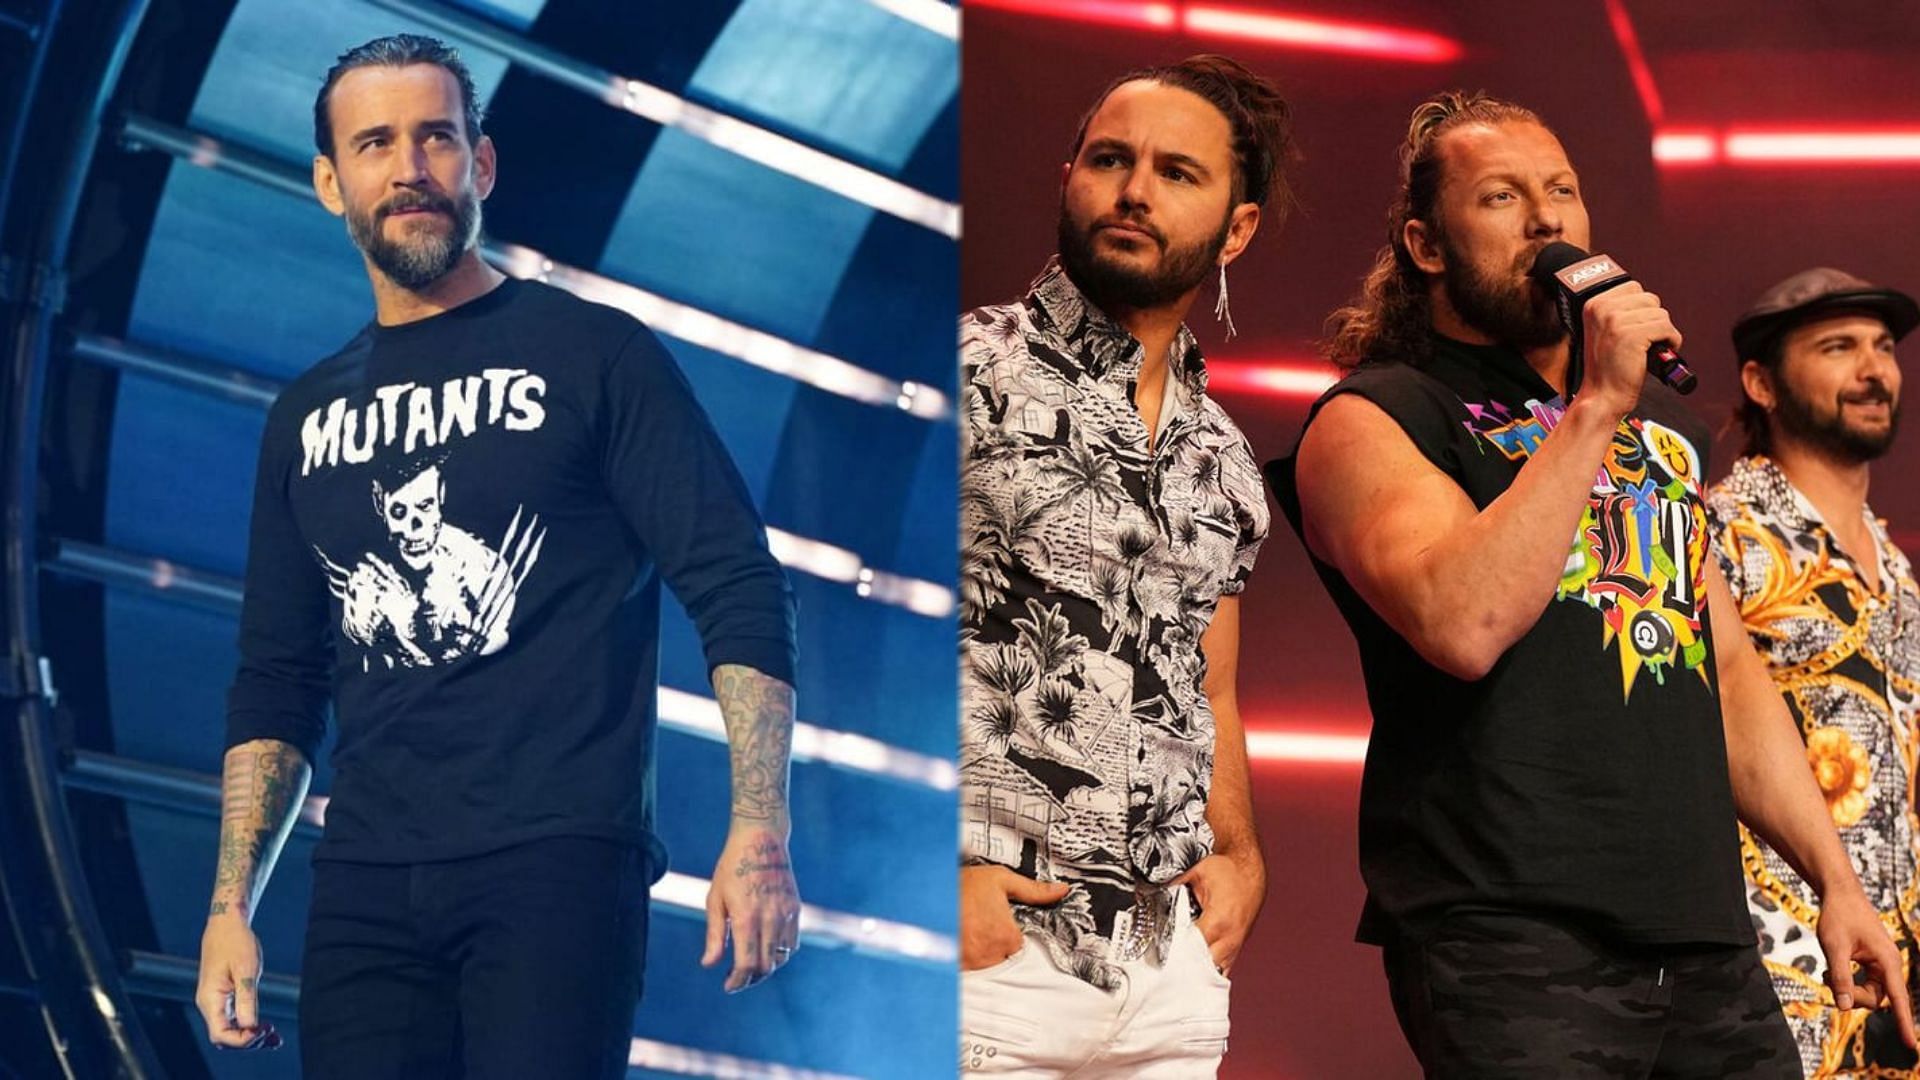 Could the two parties make amends for the AEW All Out backstage brawl?